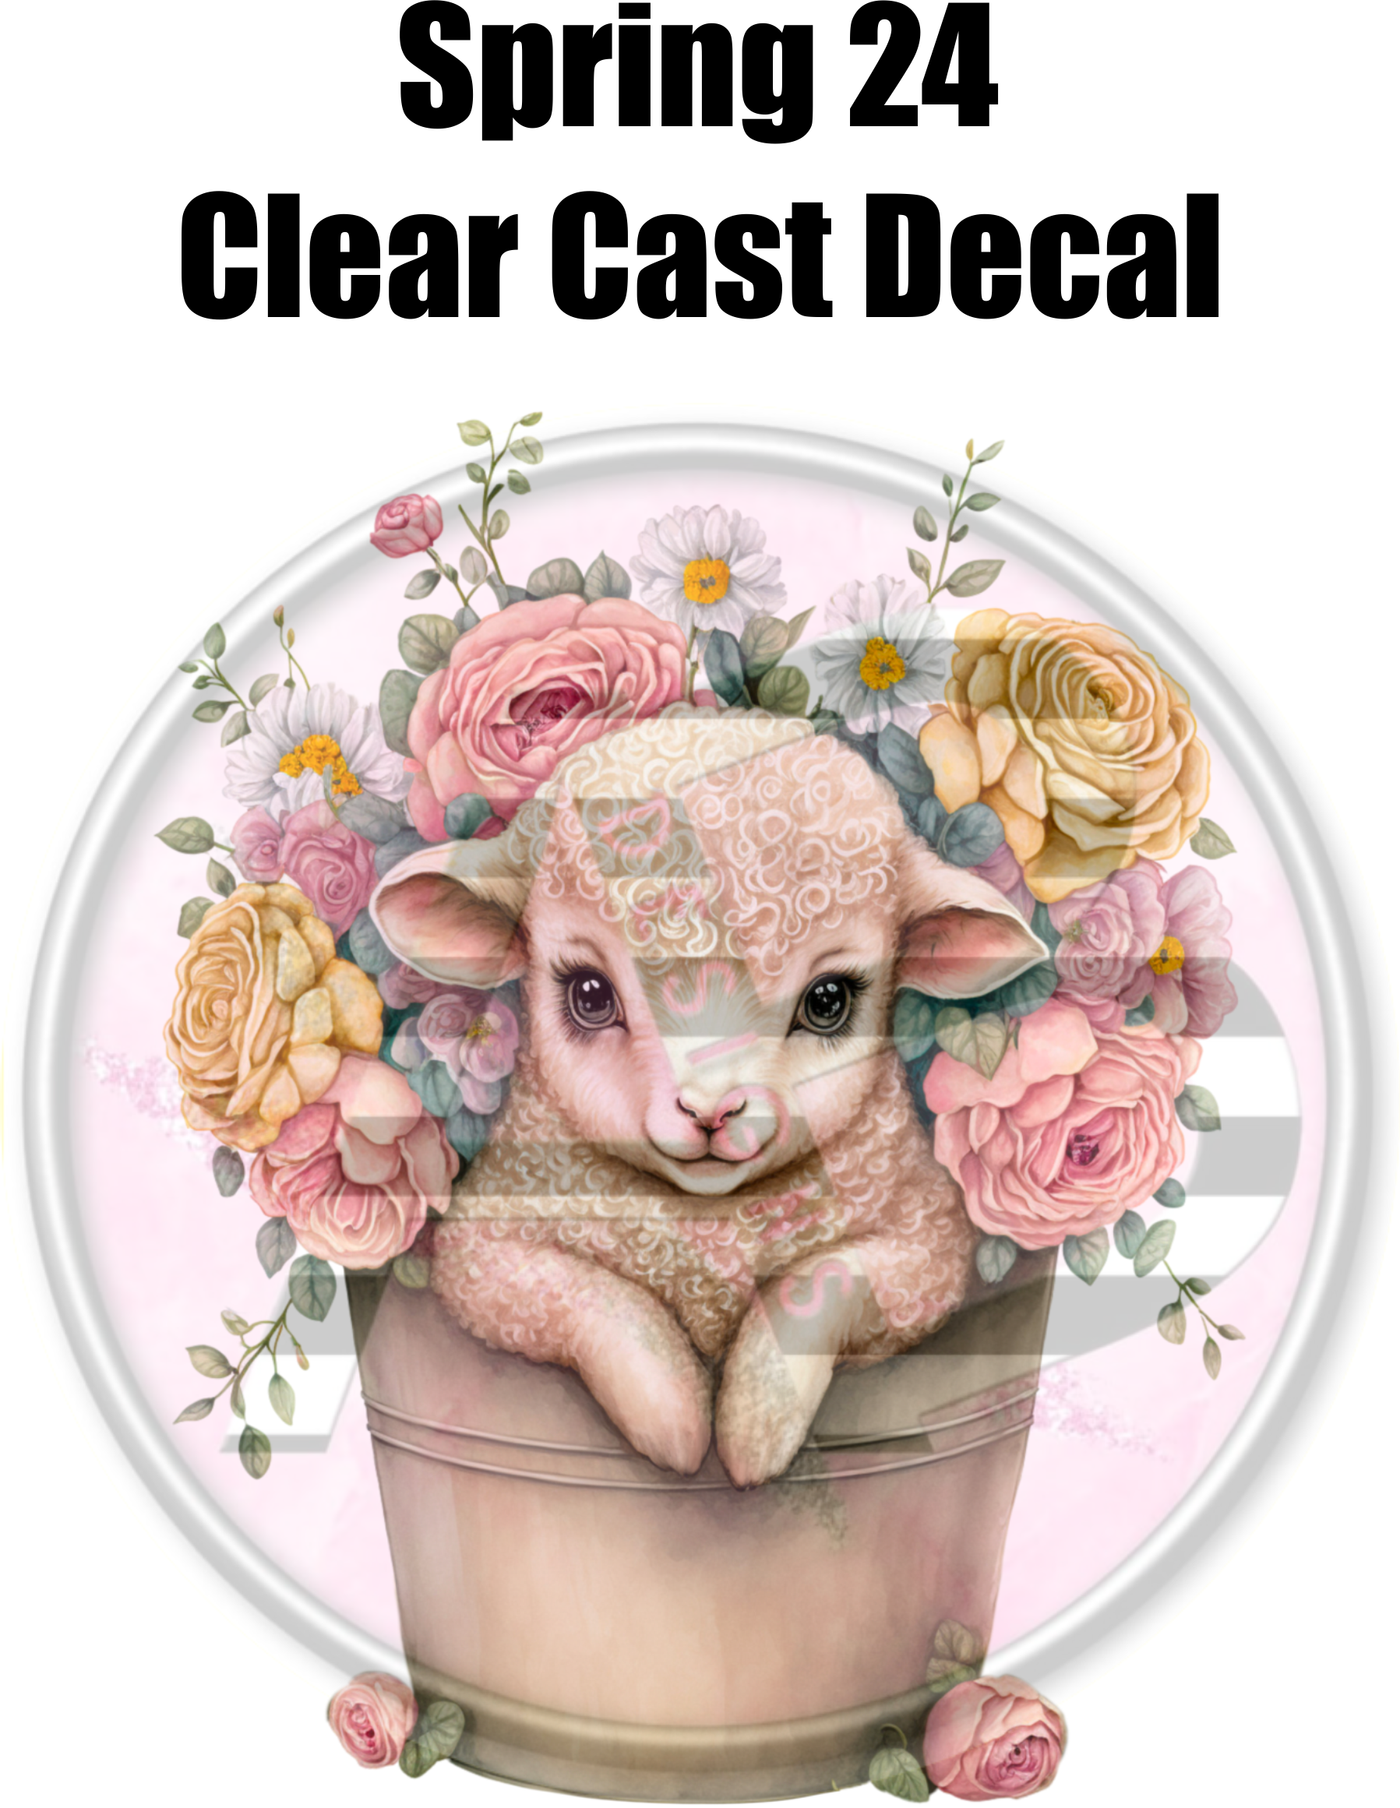 Spring 24 - Clear Cast Decal